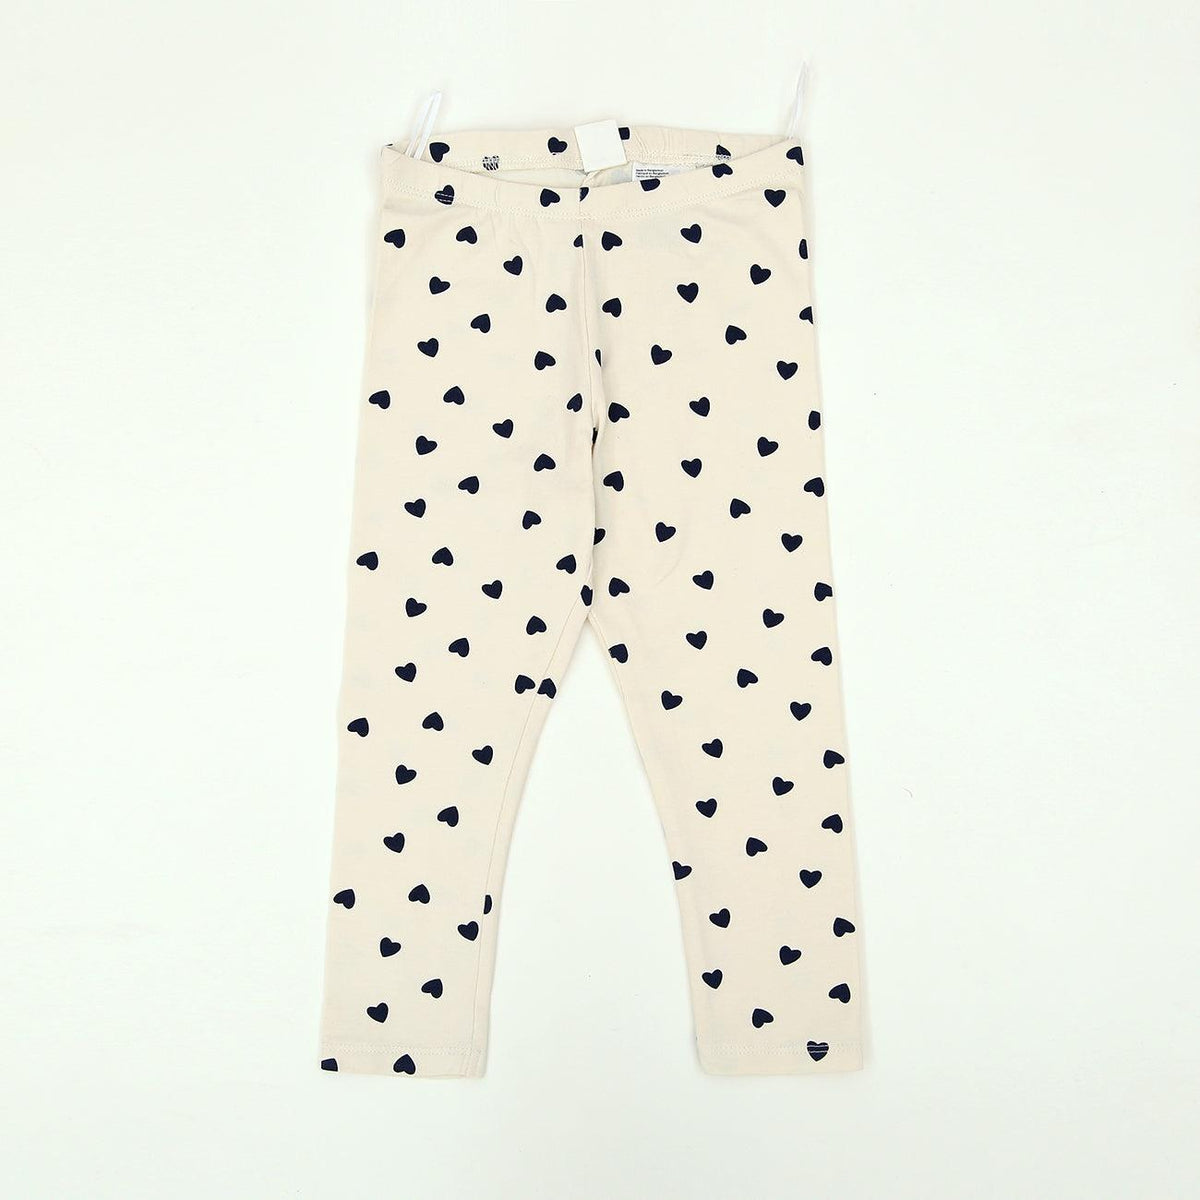 Imported All-Over Printed Soft Cotton Legging For Girls 4-6 MONTH - 1.5-2 YRS (HM-11622) - Brands River